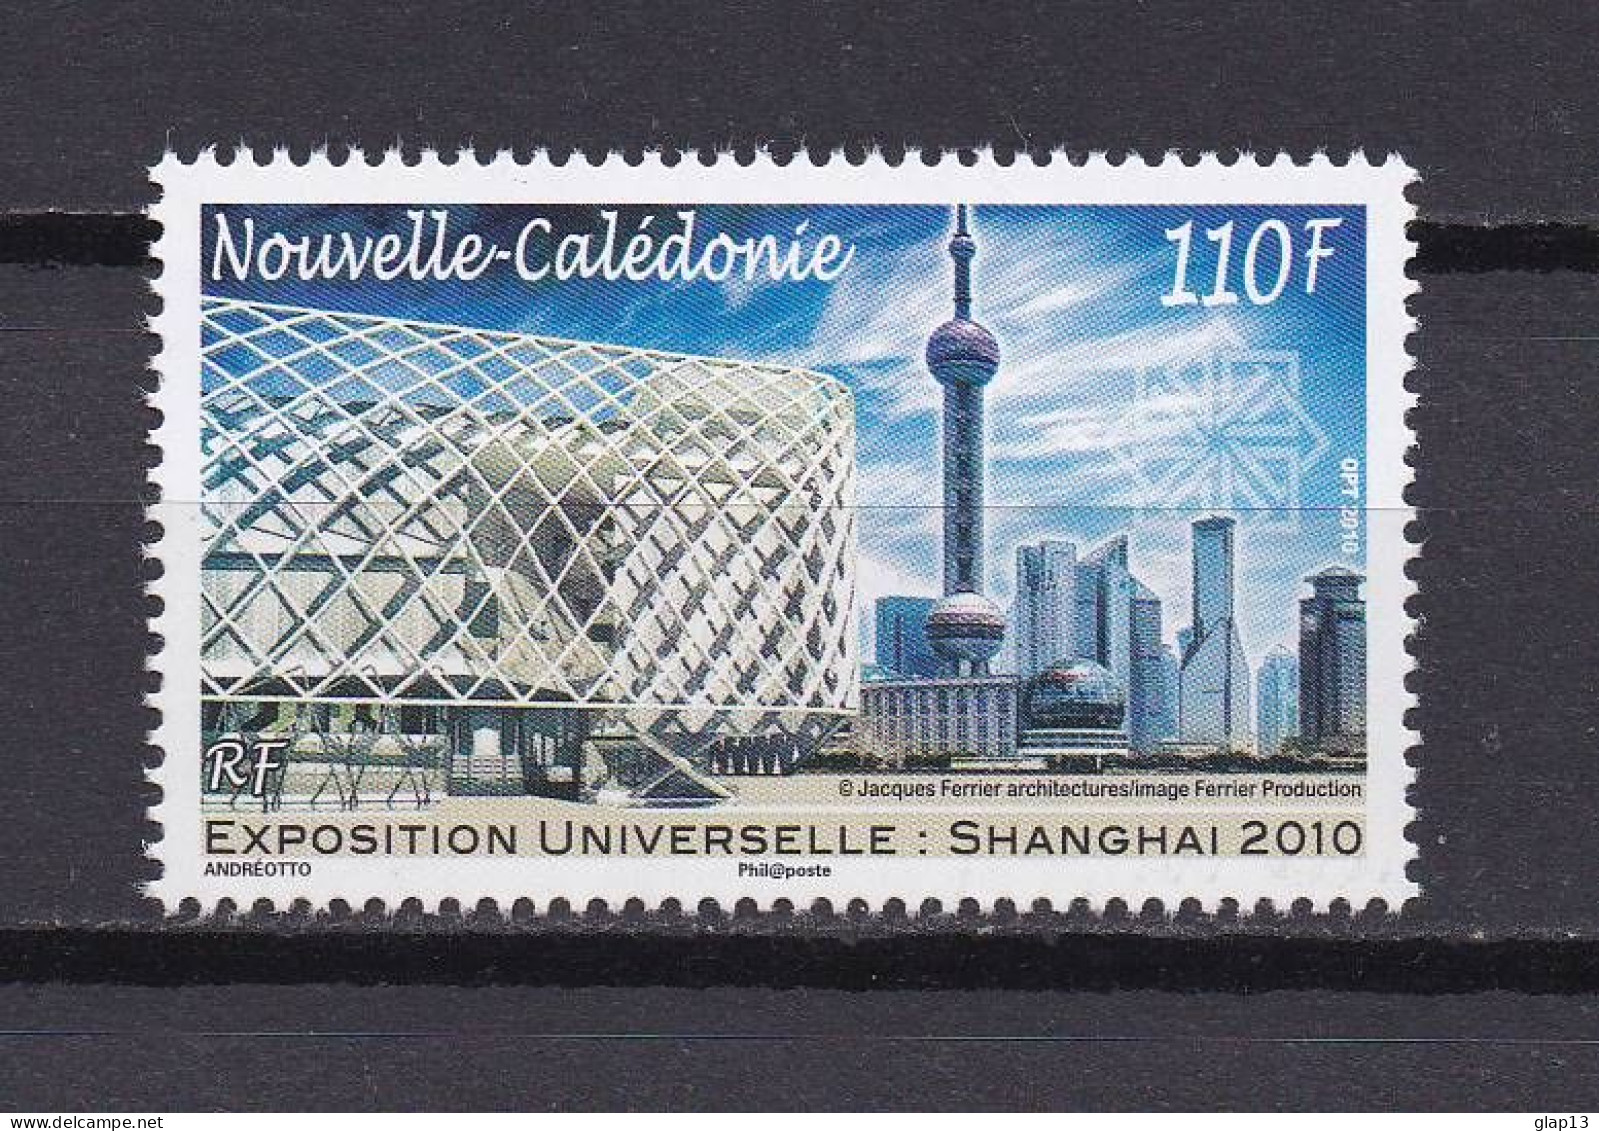 NOUVELLE-CALEDONIE 2010 TIMBRE N°1101 NEUF** EXPOSITION - Unused Stamps